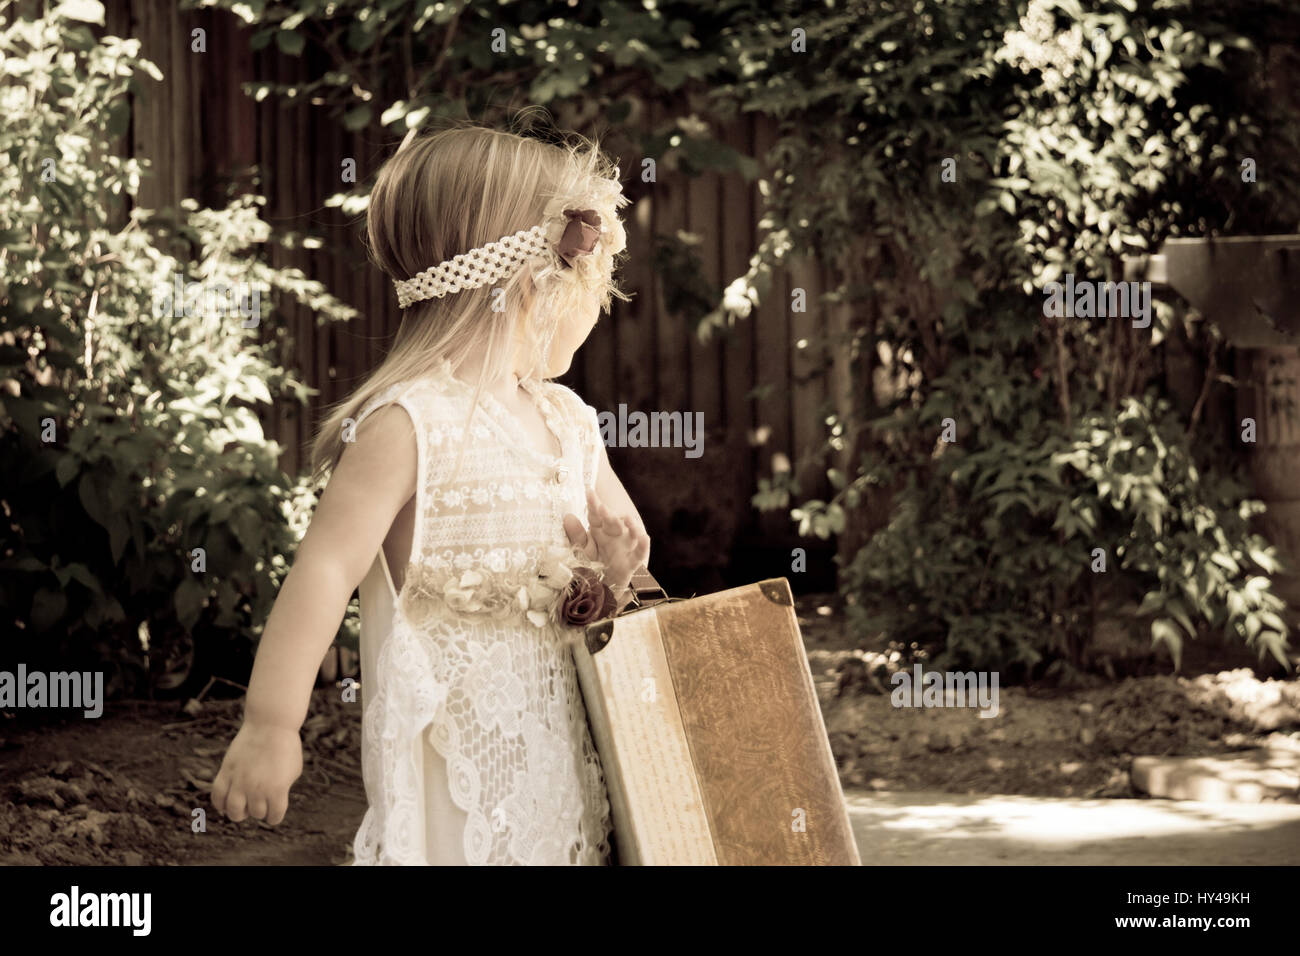 Little blonde toddler girl with peasant dress and luggage looking back over shoulder Stock Photo